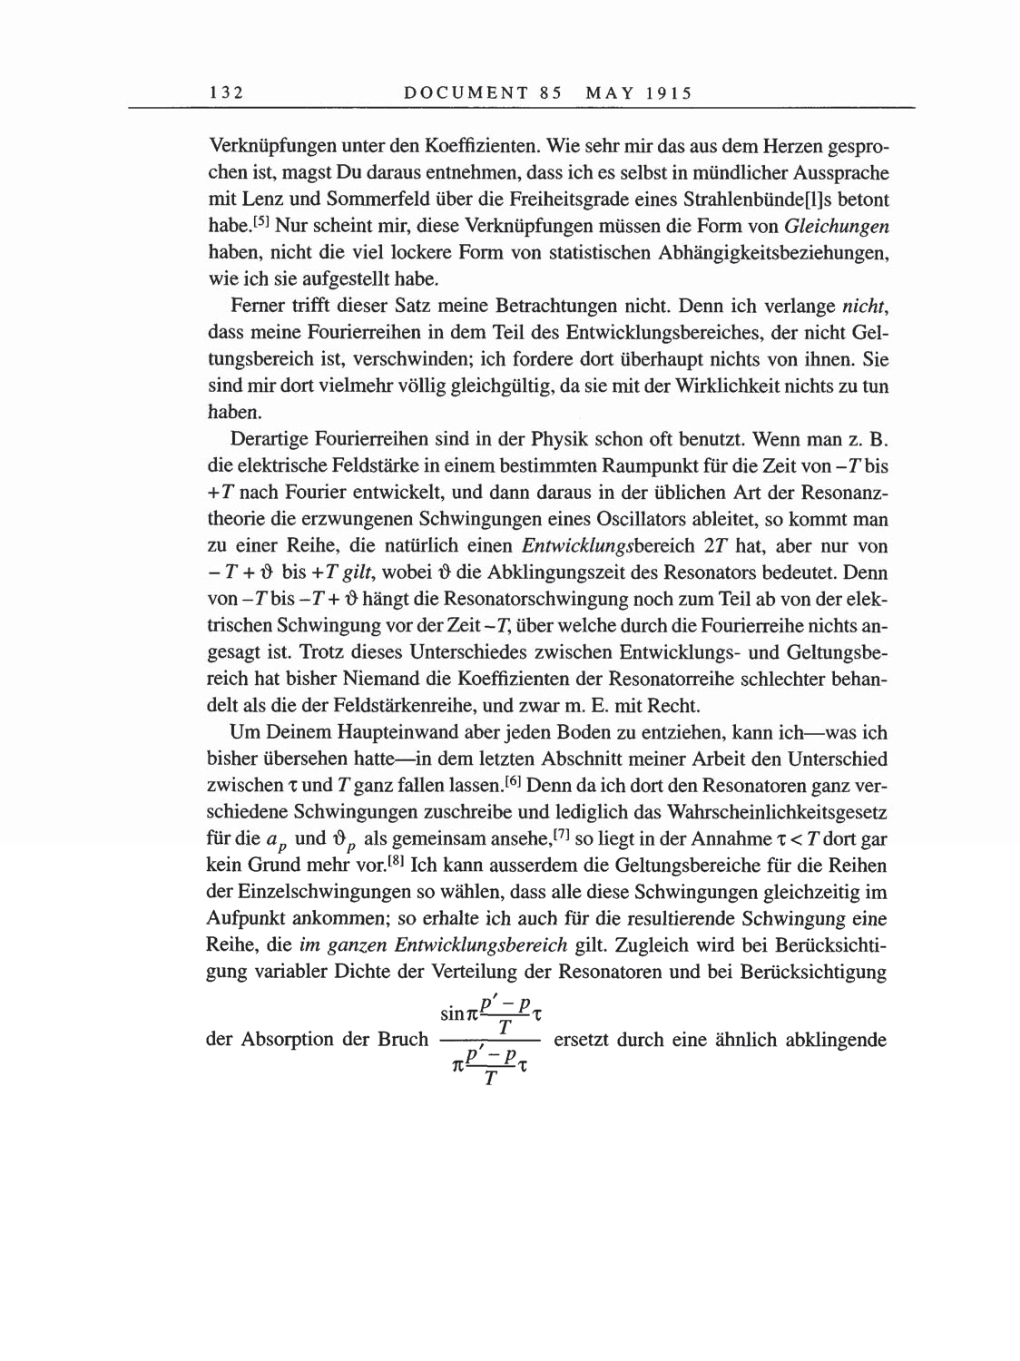 Volume 8, Part A: The Berlin Years: Correspondence 1914-1917 page 132